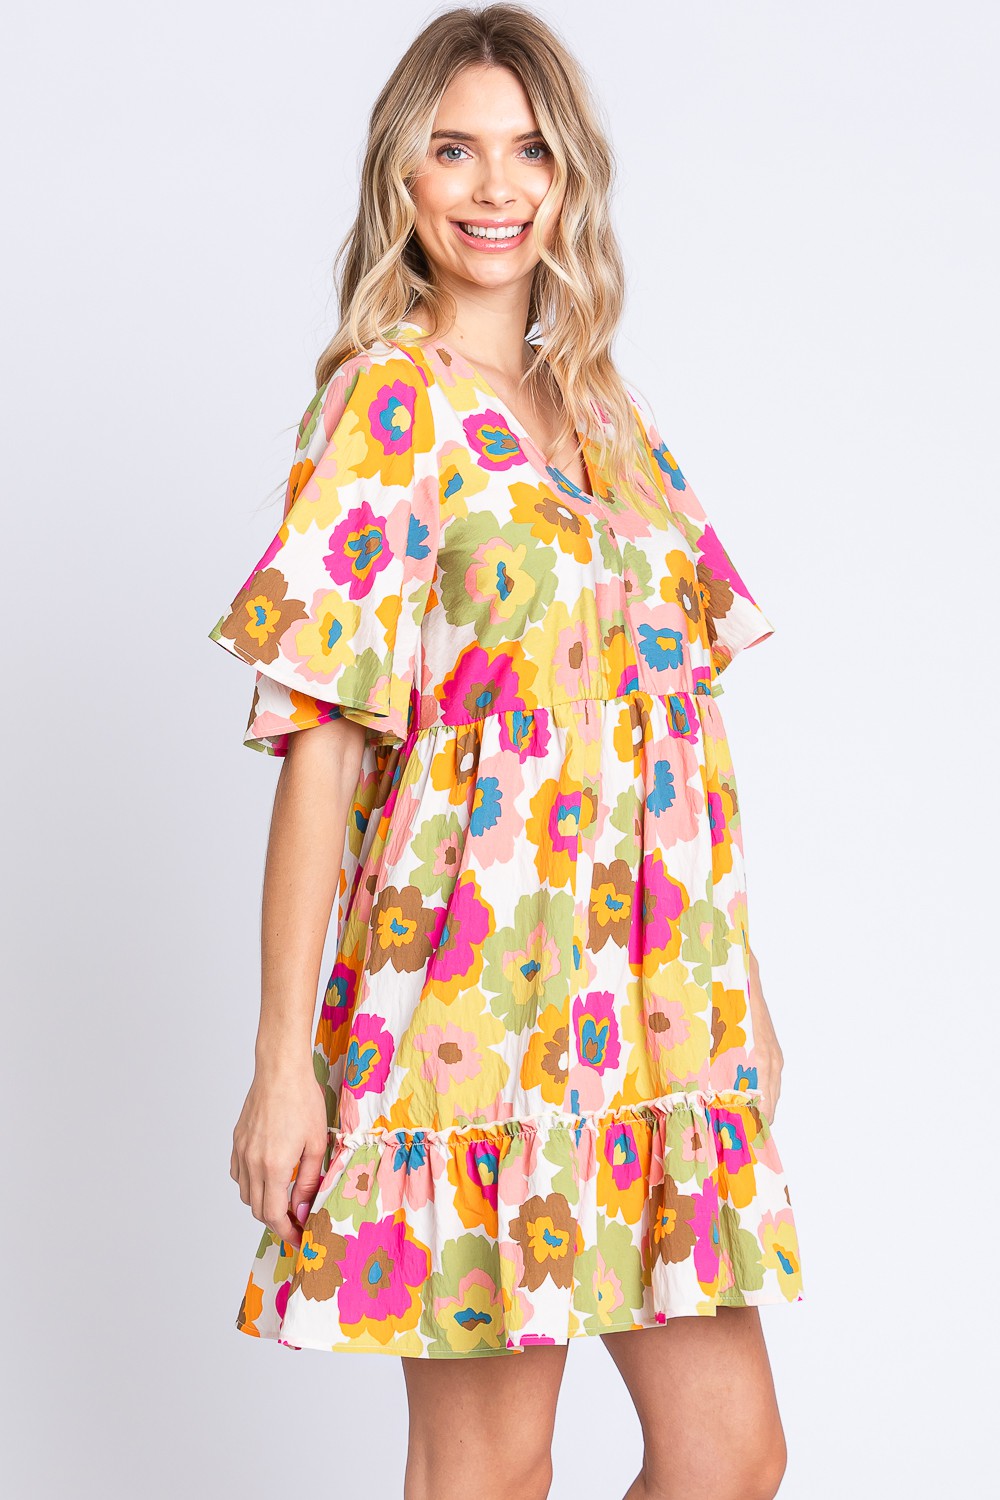 Loved And Adored - Floral Ruffle-Trim Dress